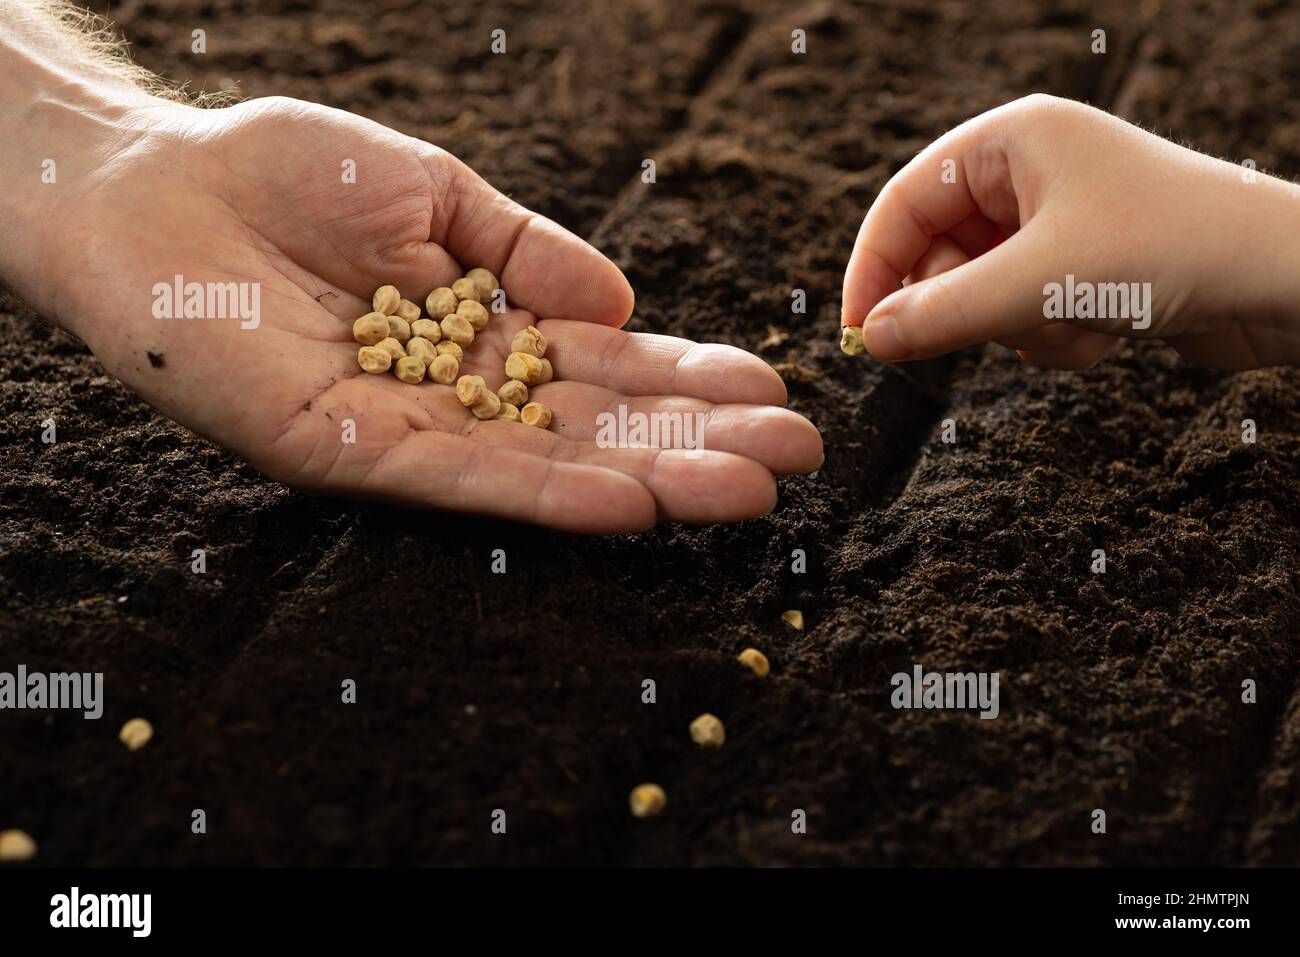 A child's hand and an adult's hand plant seeds. Growing vegetable seeds on seed soil in gardening metaphor, agriculture concept. Sowing seeds in open Stock Photo